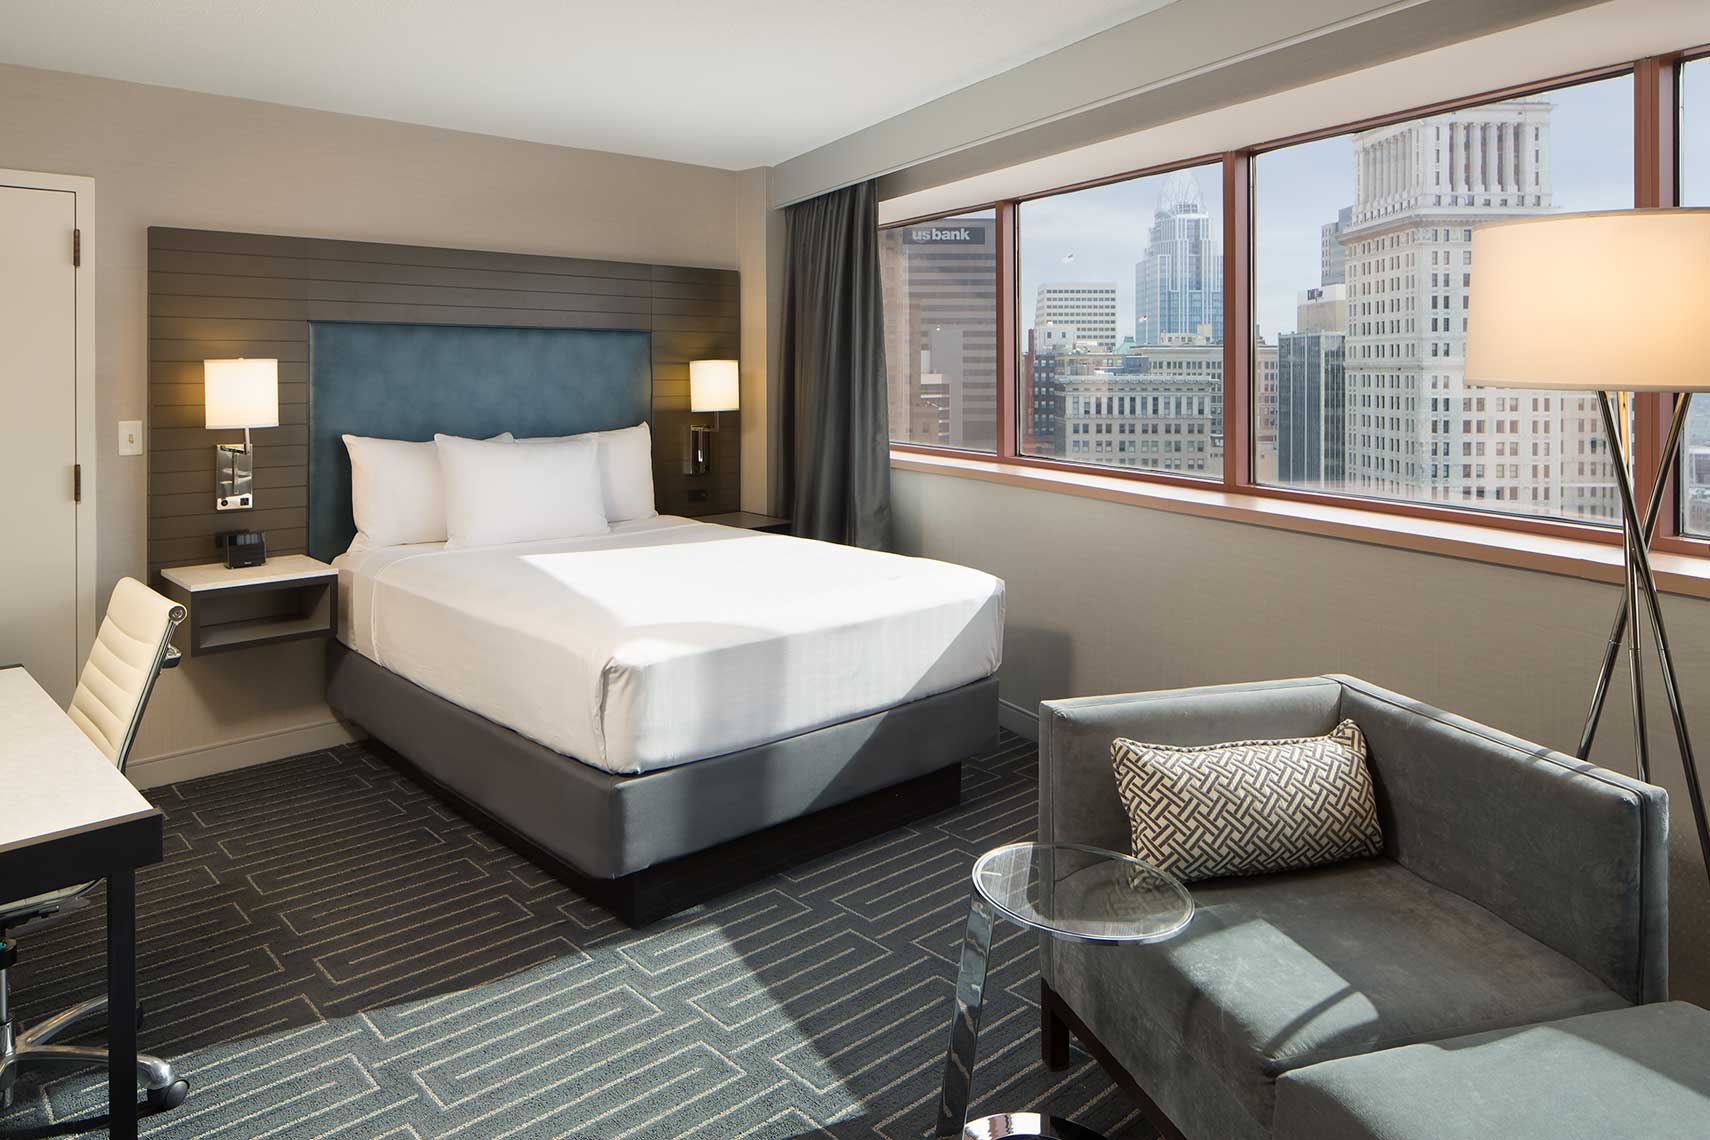 A view of a guest room at the Hyatt Regency Cincinnati showing the impressive downtown view